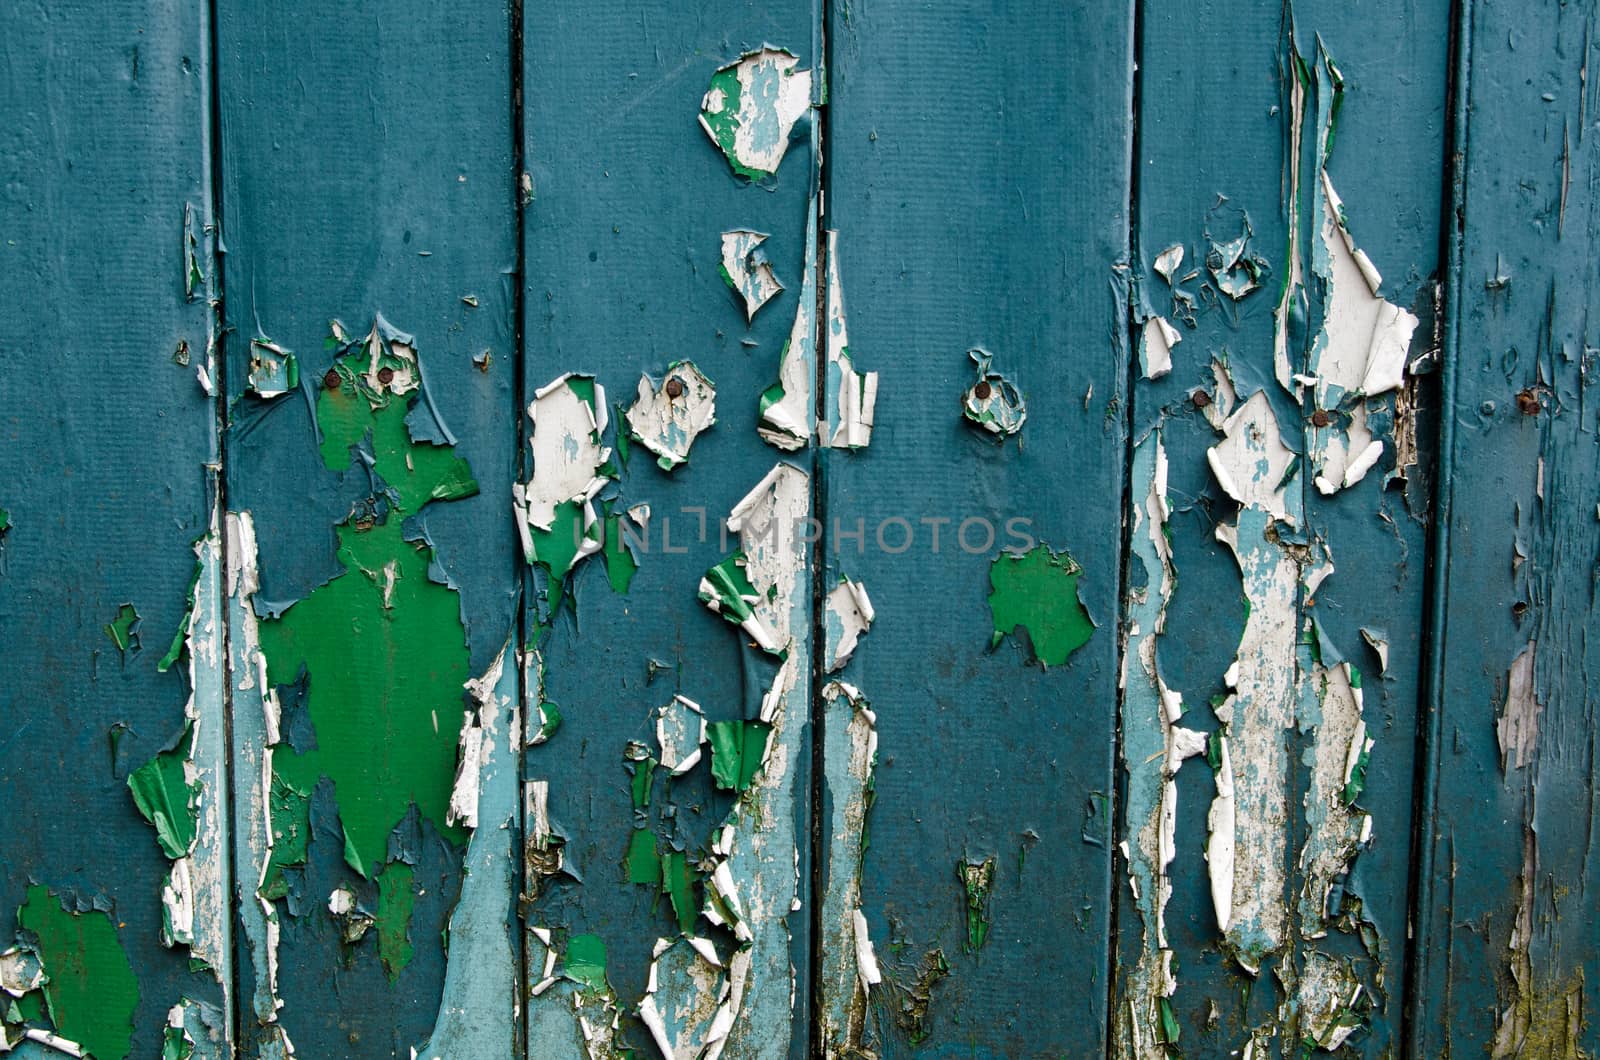 Peeling paint on a wooden door showing previous shades of green and blue that have been used in years past.